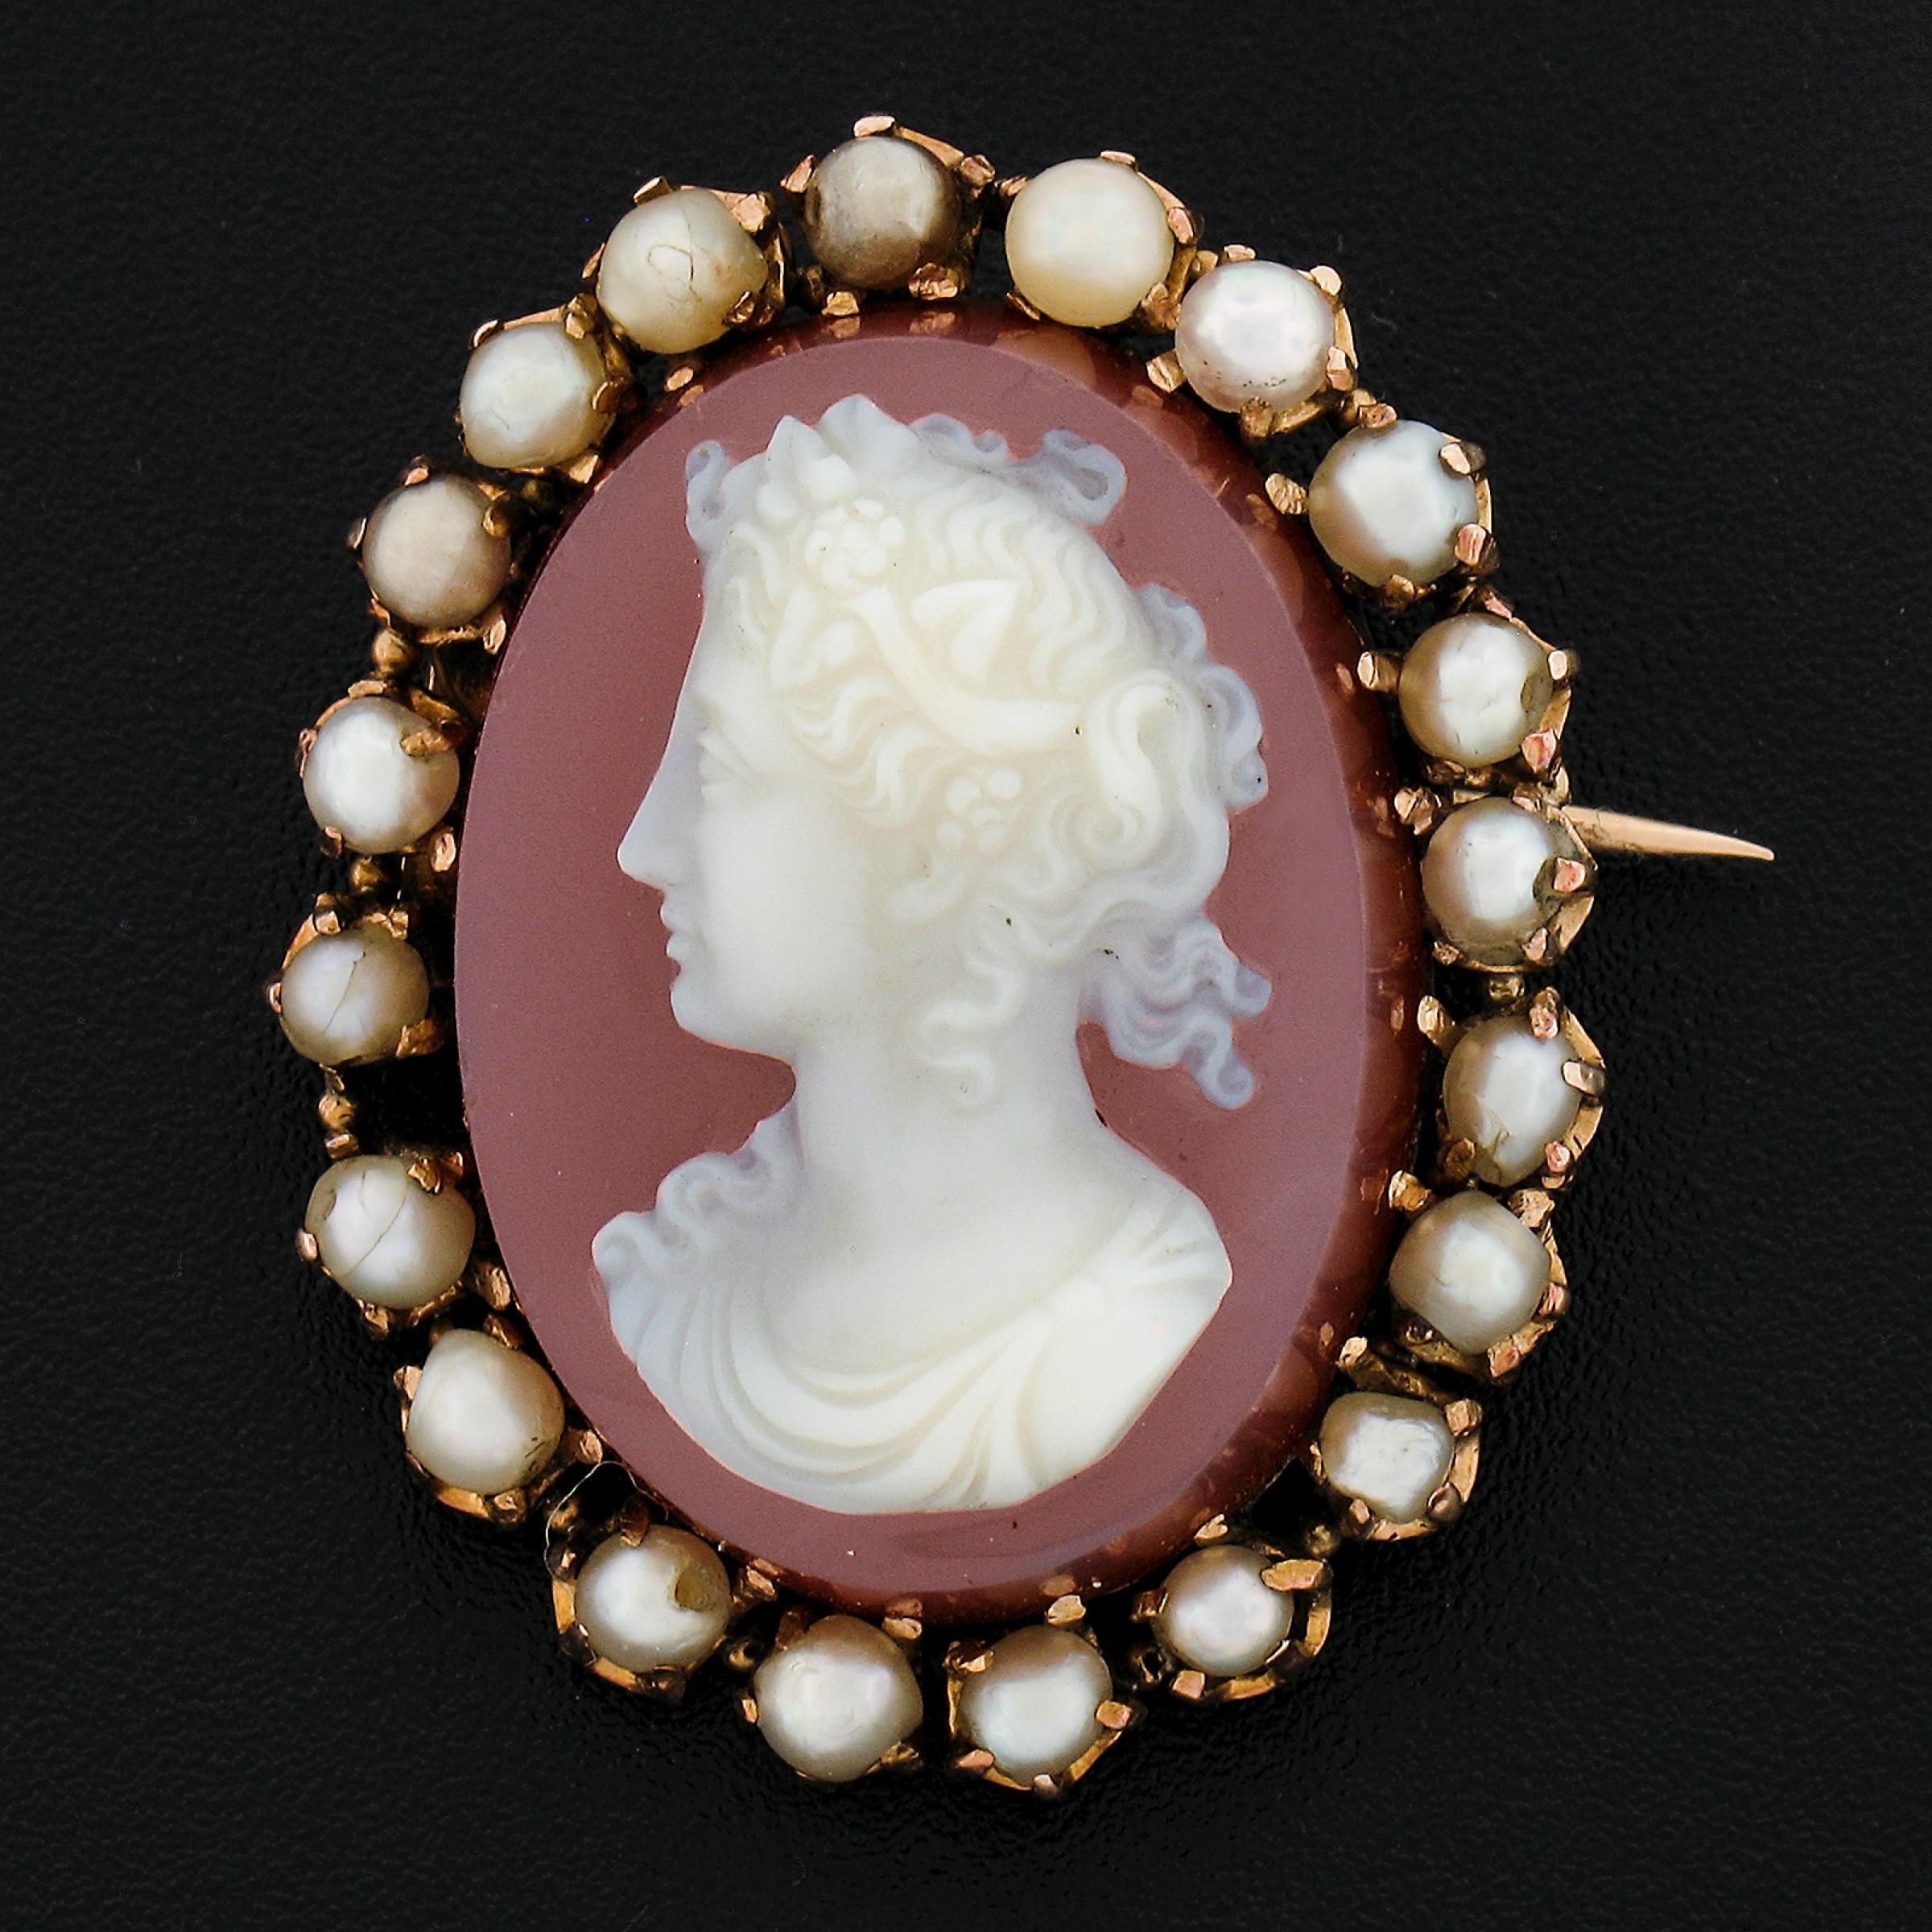 --Stone(s):--
(1) Carved Hardstone Cameo - Oval Shaped - Multi-Prong Set - Orangy-Brown Base Color w/ white Carving - 26.3x19.3mm (approx.)
(20) Genuine Cultured Pearls - Round Shape - Prong Set - Grayish White Color - Good Luster - 2.5-3.6mm